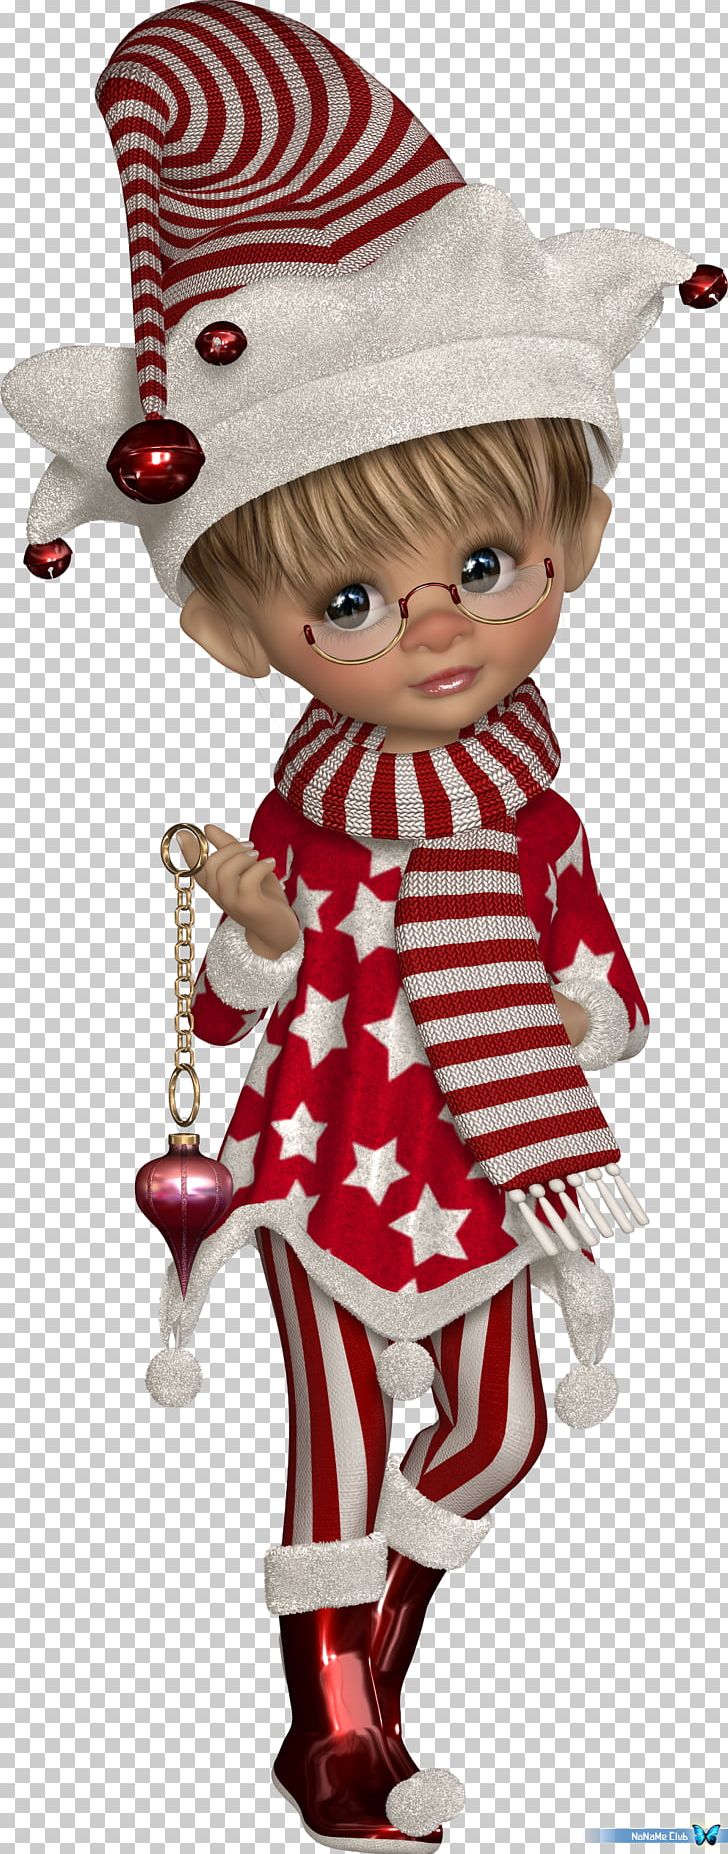 Christmas Ornament Biscuits Party PNG, Clipart, Christmas, Doll, Fictional Character, Figurine, Headgear Free PNG Download